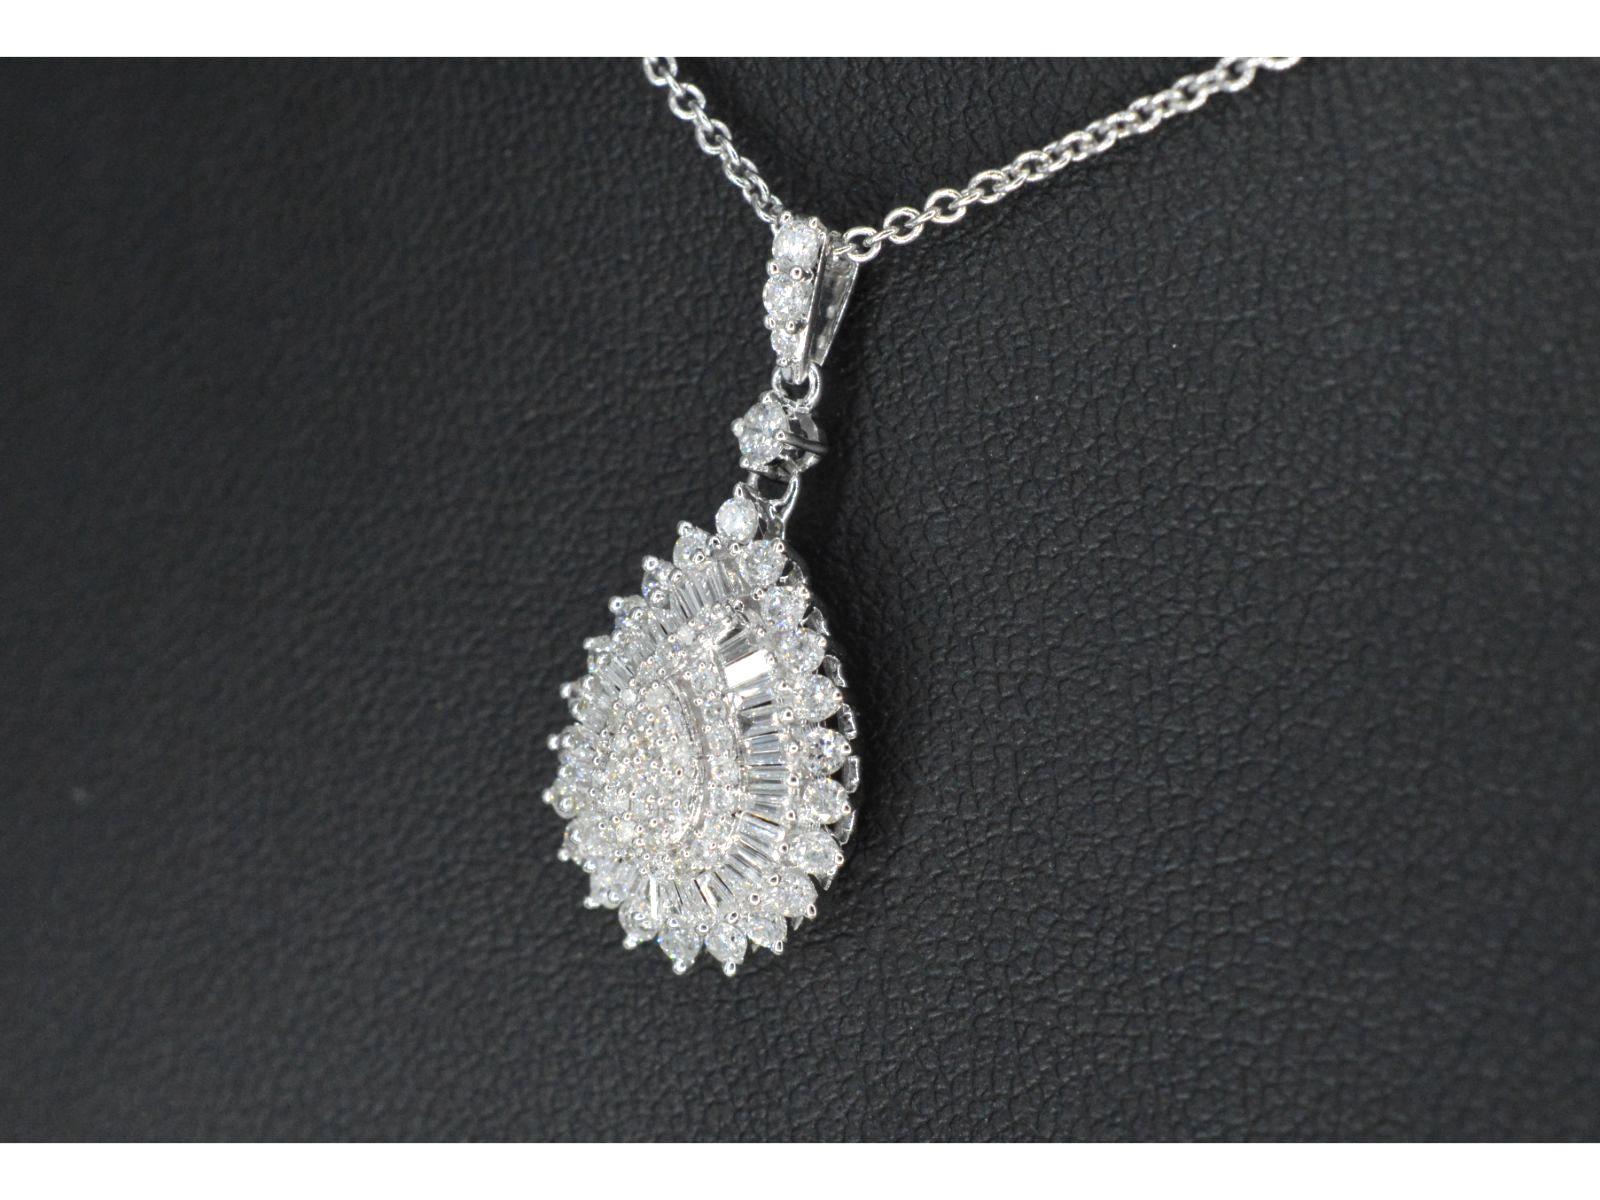 Introducing a stunning pendant, adorned with a beautiful combination of brilliant-cut and baguette-cut diamonds. The total diamond weight is 0.75 carat, with a color grading of F-G and a clarity ranging from SI to P. The quality of these diamonds is